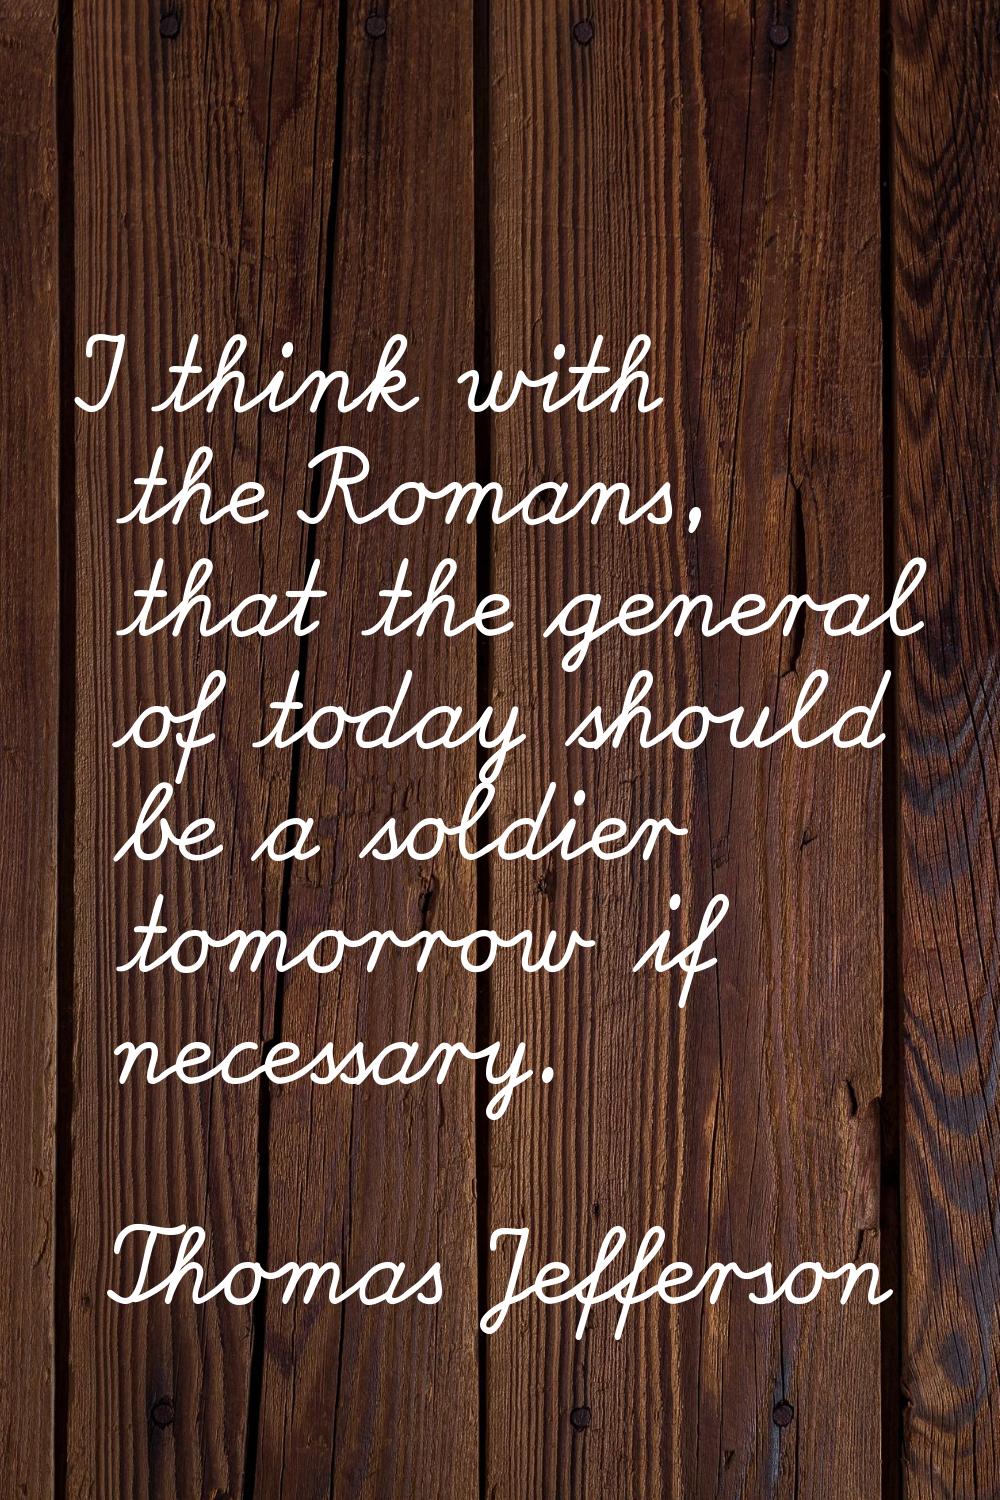 I think with the Romans, that the general of today should be a soldier tomorrow if necessary.